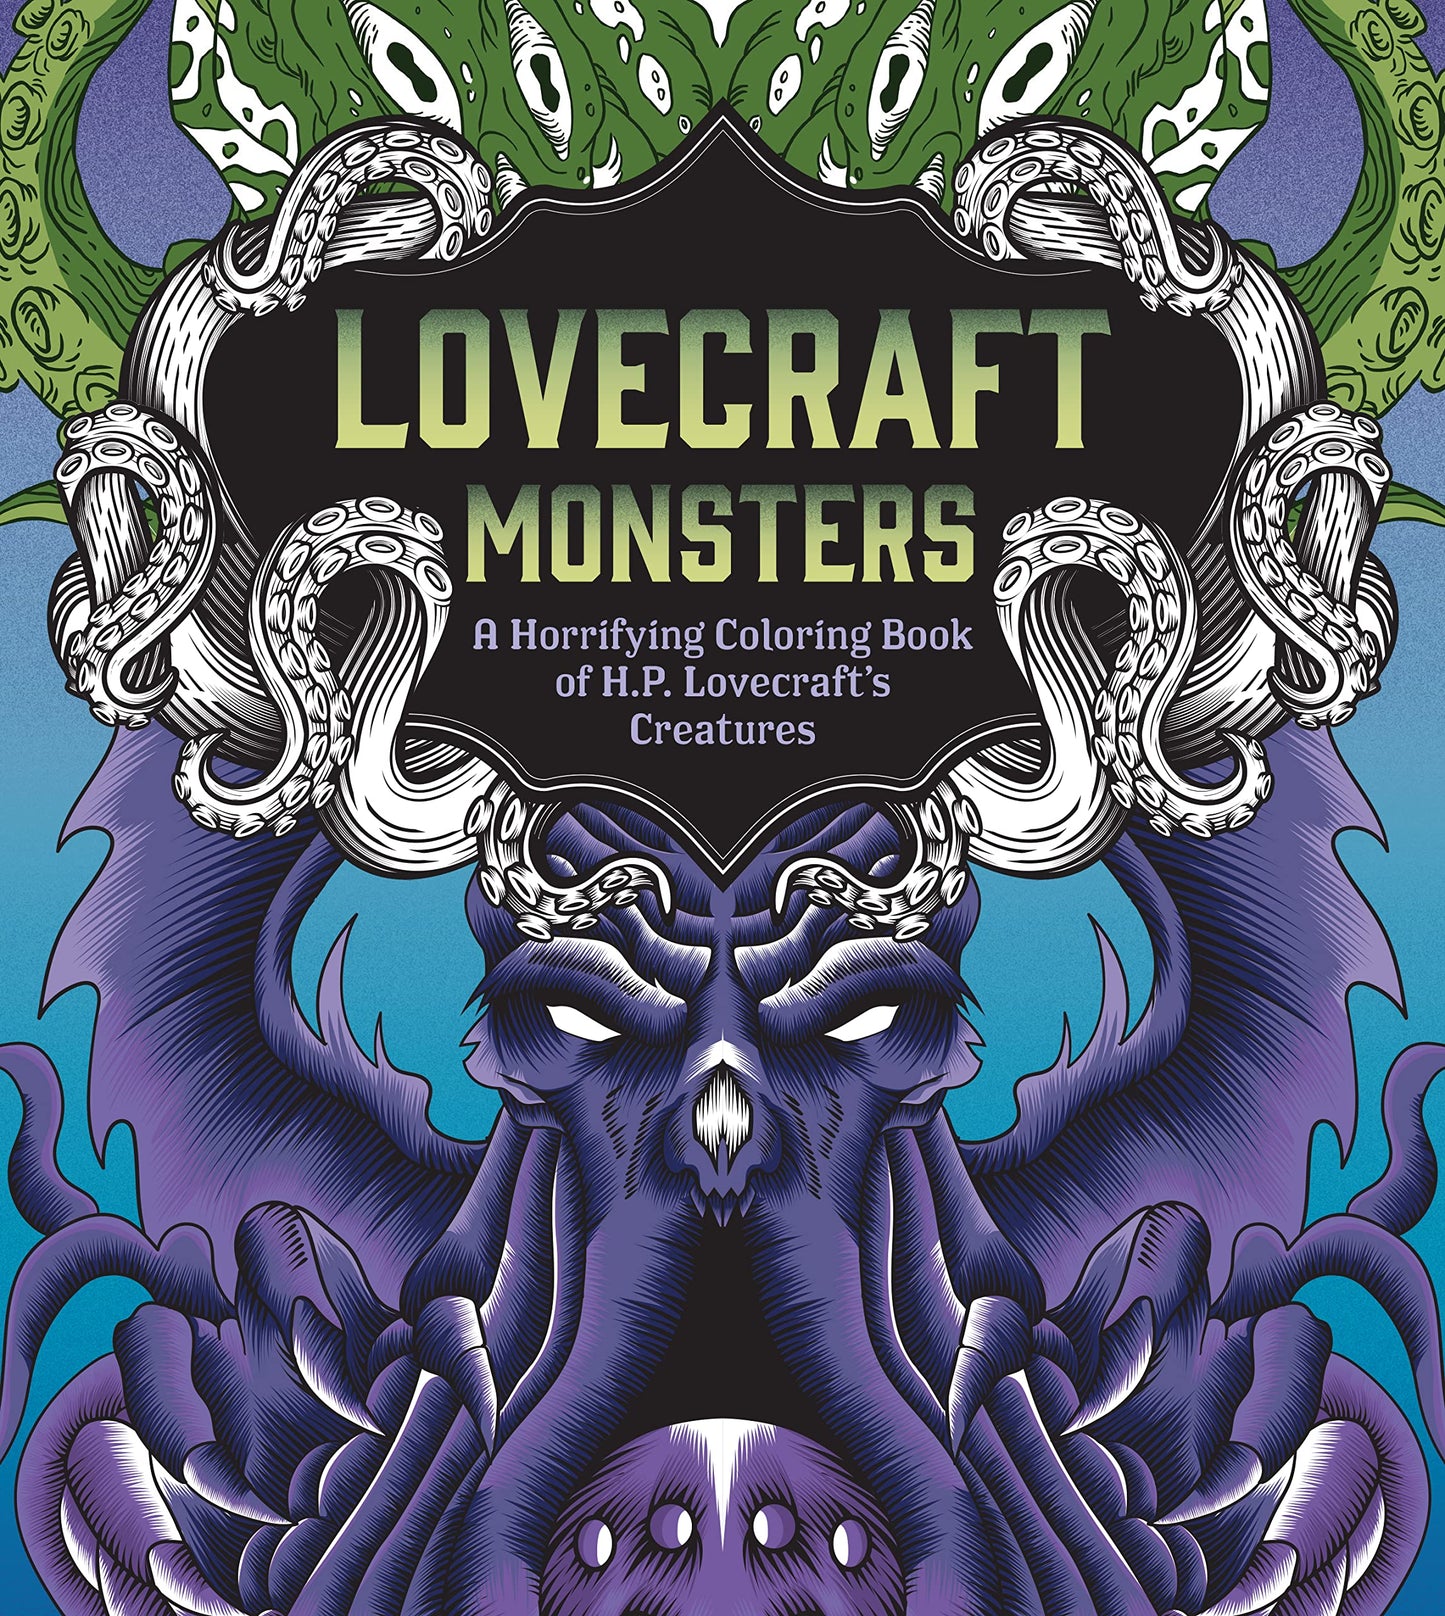 Zen Coloring Book, Lovecraft Monsters: A Horrifying Coloring Book of H. P. Lovecraft’s Creature